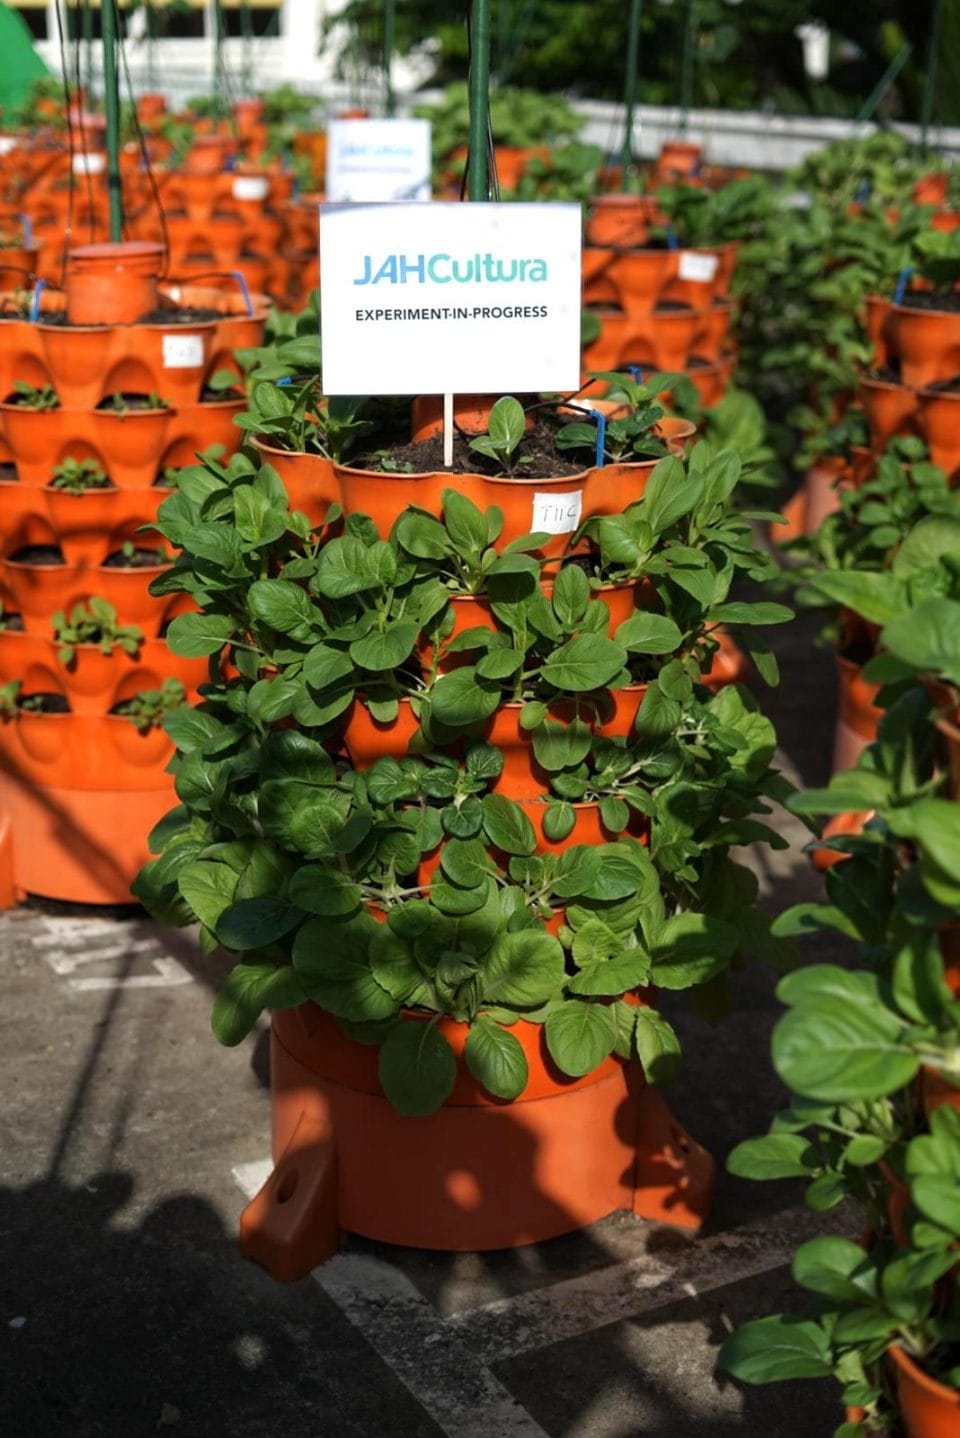 A Tour Of the Nature’s International Commodity With JAH Cultura's Tan Chong Hui